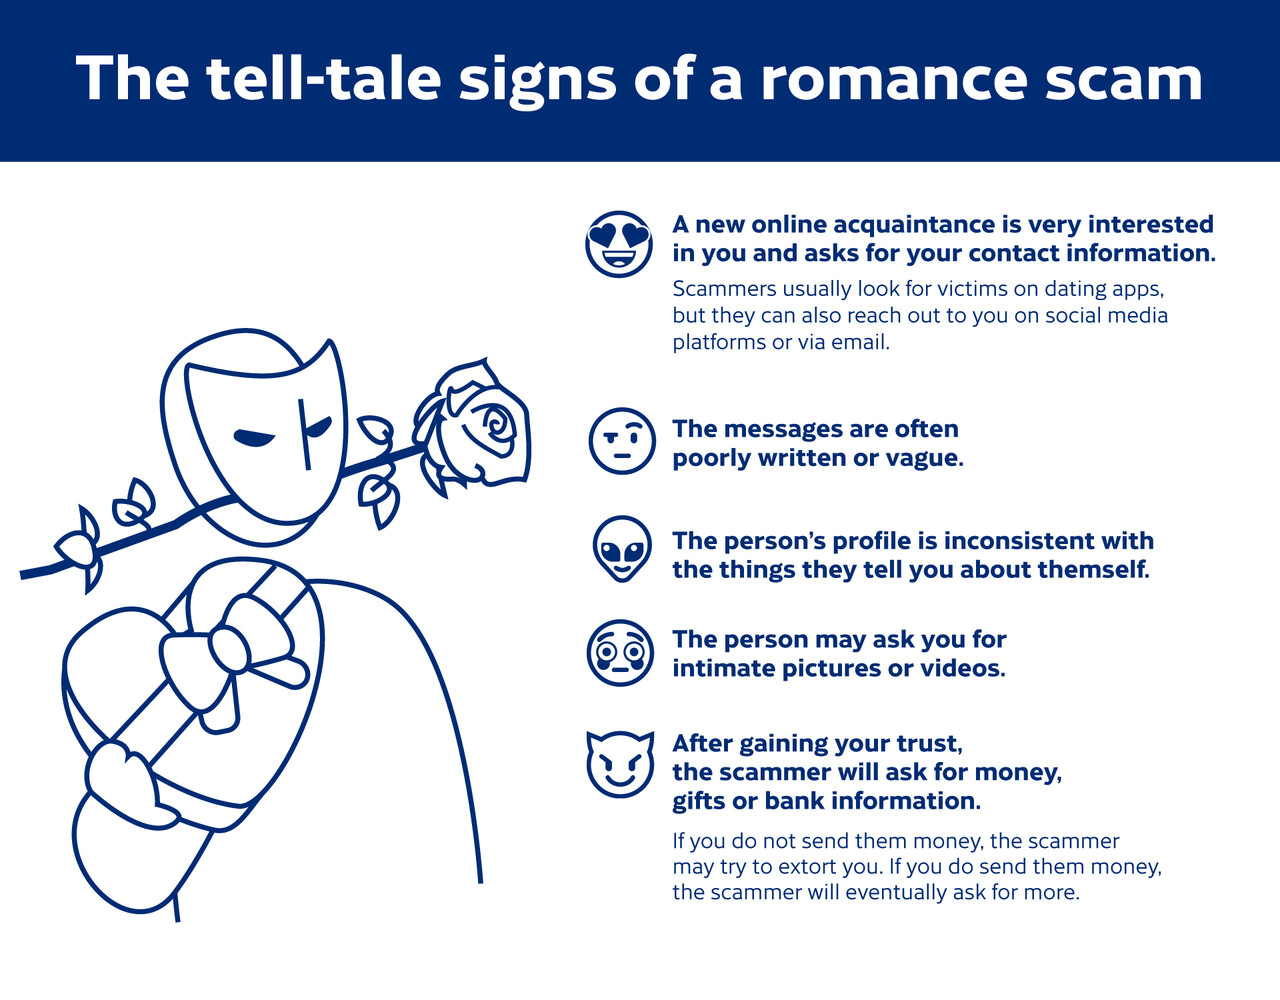 The tell-tale signs of a romance scam. A new online acquaintance is very interested in you and asks for your contact information. The messages are often poorly written or vague. The person’s profile is inconsistent with the things they tell you about themself. The person may ask you for intimate pictures or videos. After gaining your trust, the scammer will ask for money, gifts or bank information. 